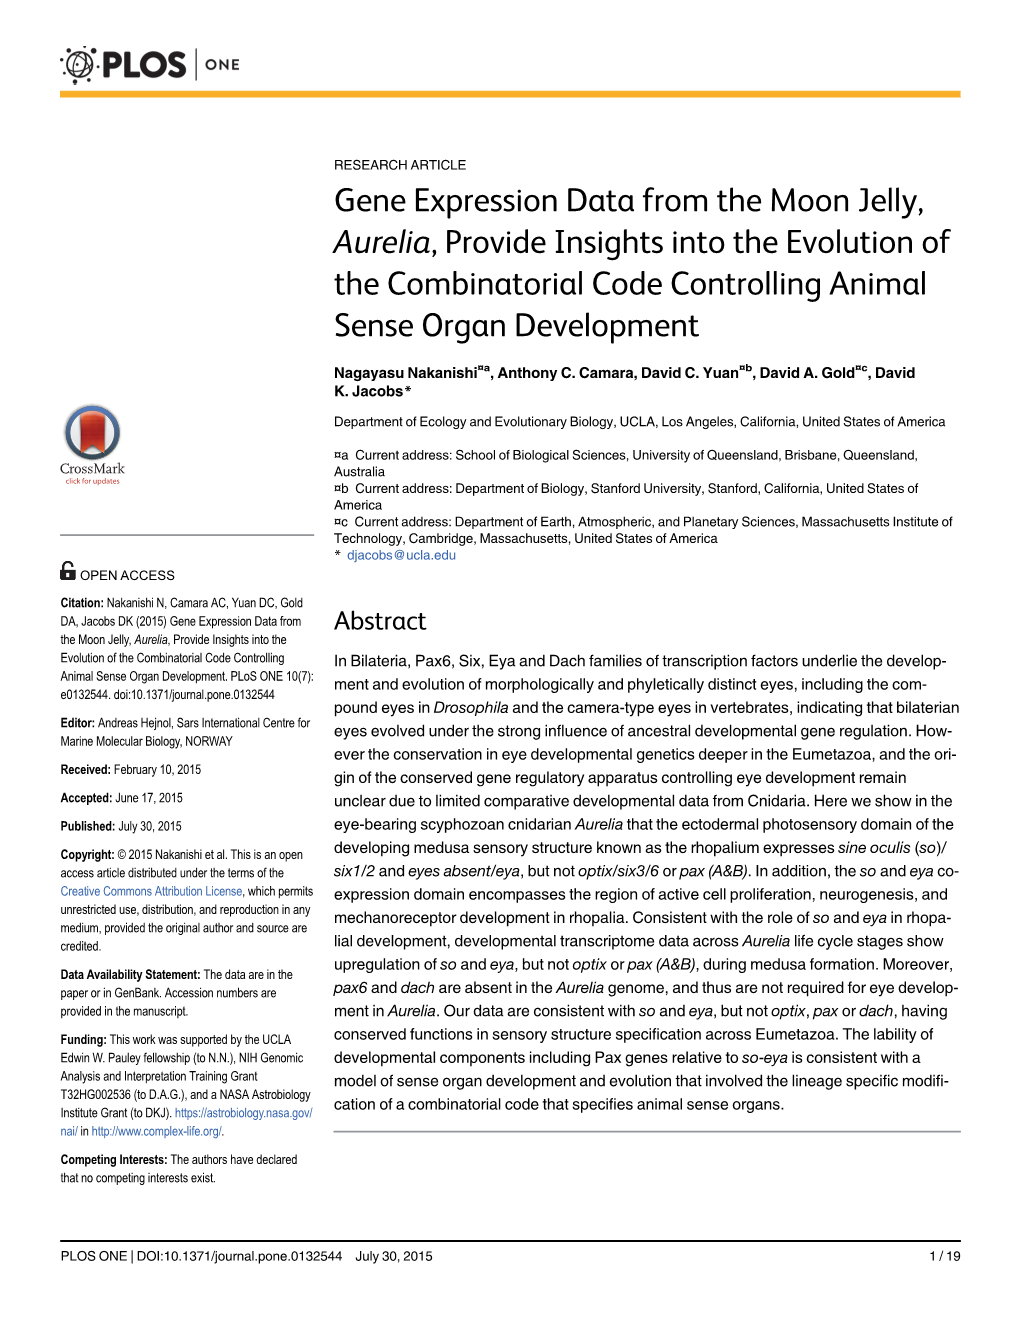 Gene Expression Data from the Moon Jelly, Aurelia, Provide Insights Into the Evolution of the Combinatorial Code Controlling Animal Sense Organ Development